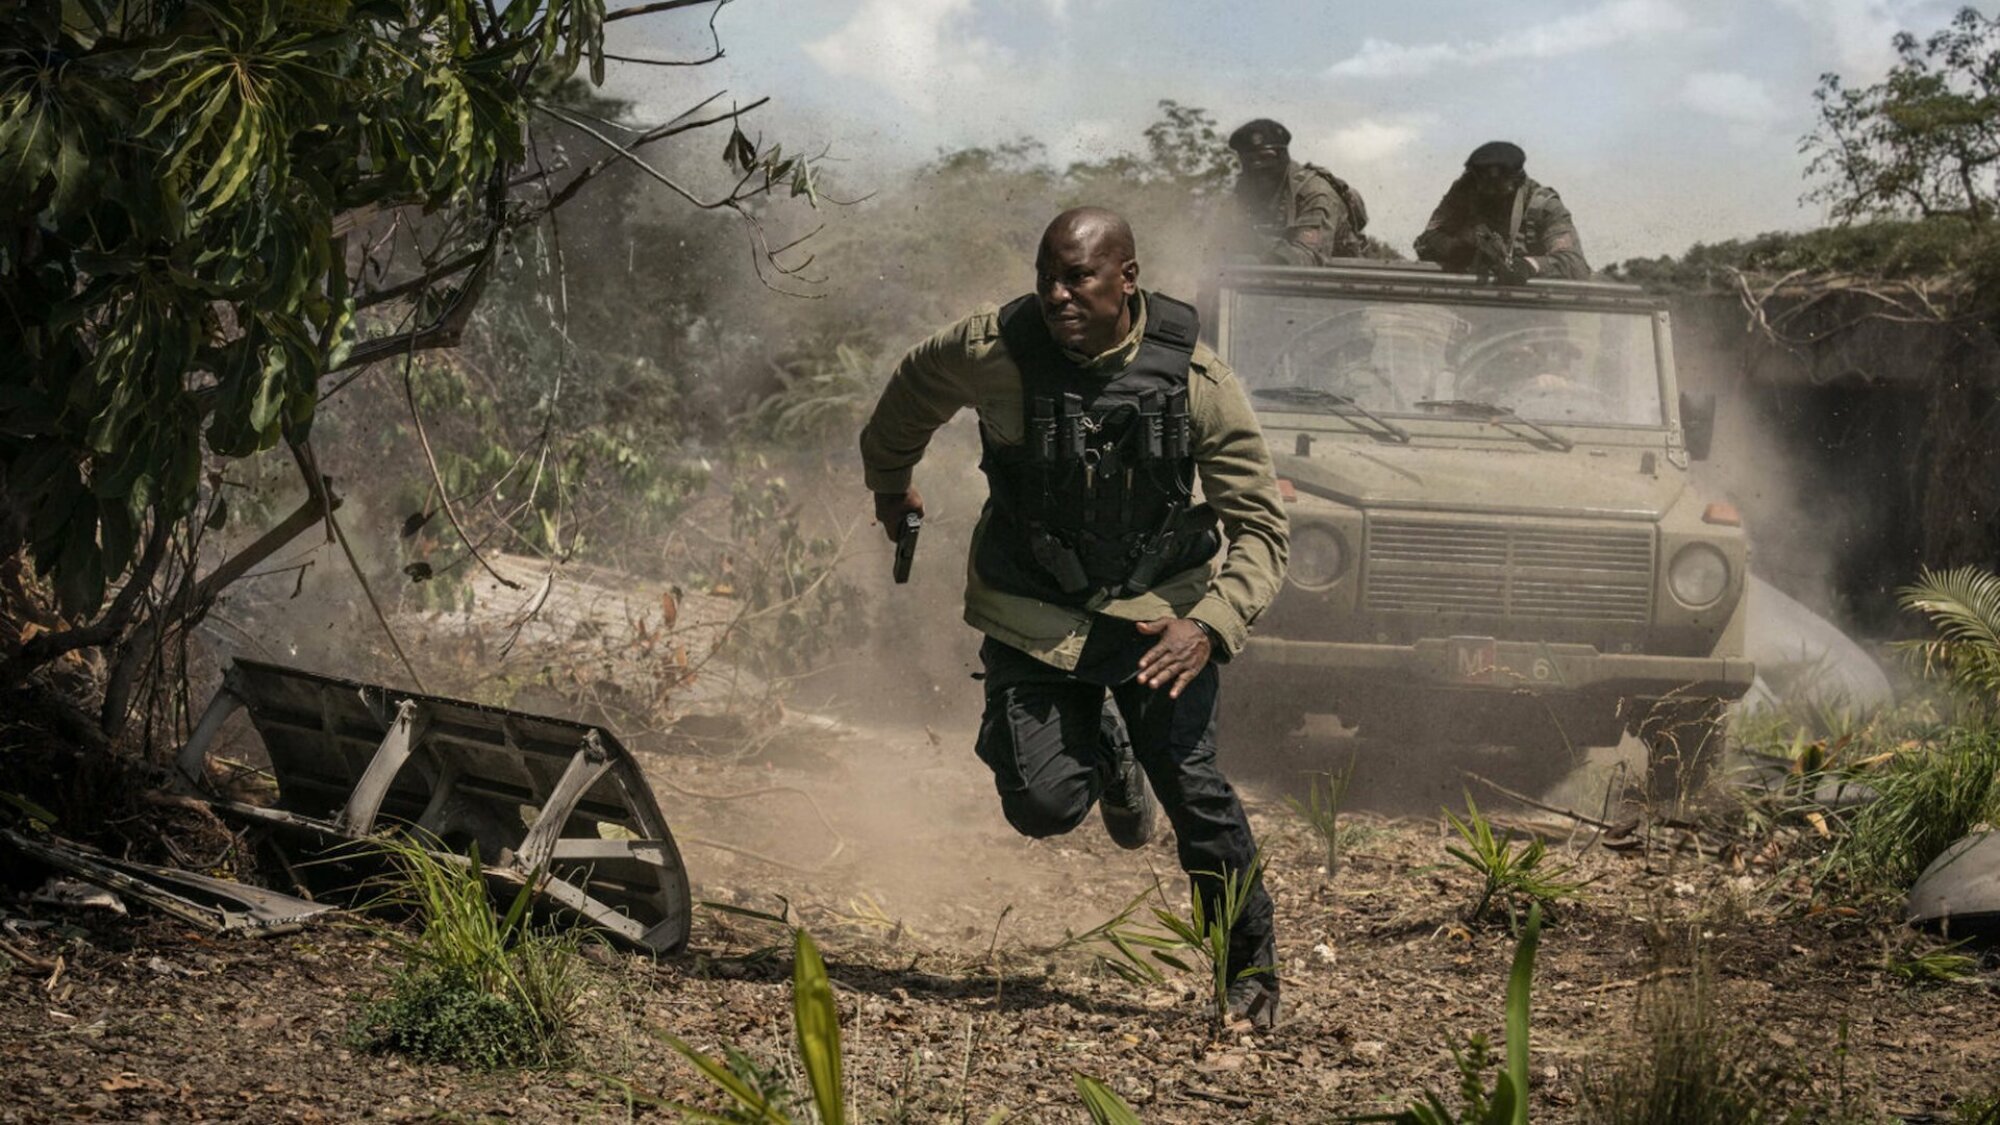 Tyrese Gibson runs from military in a jeep in "F9"